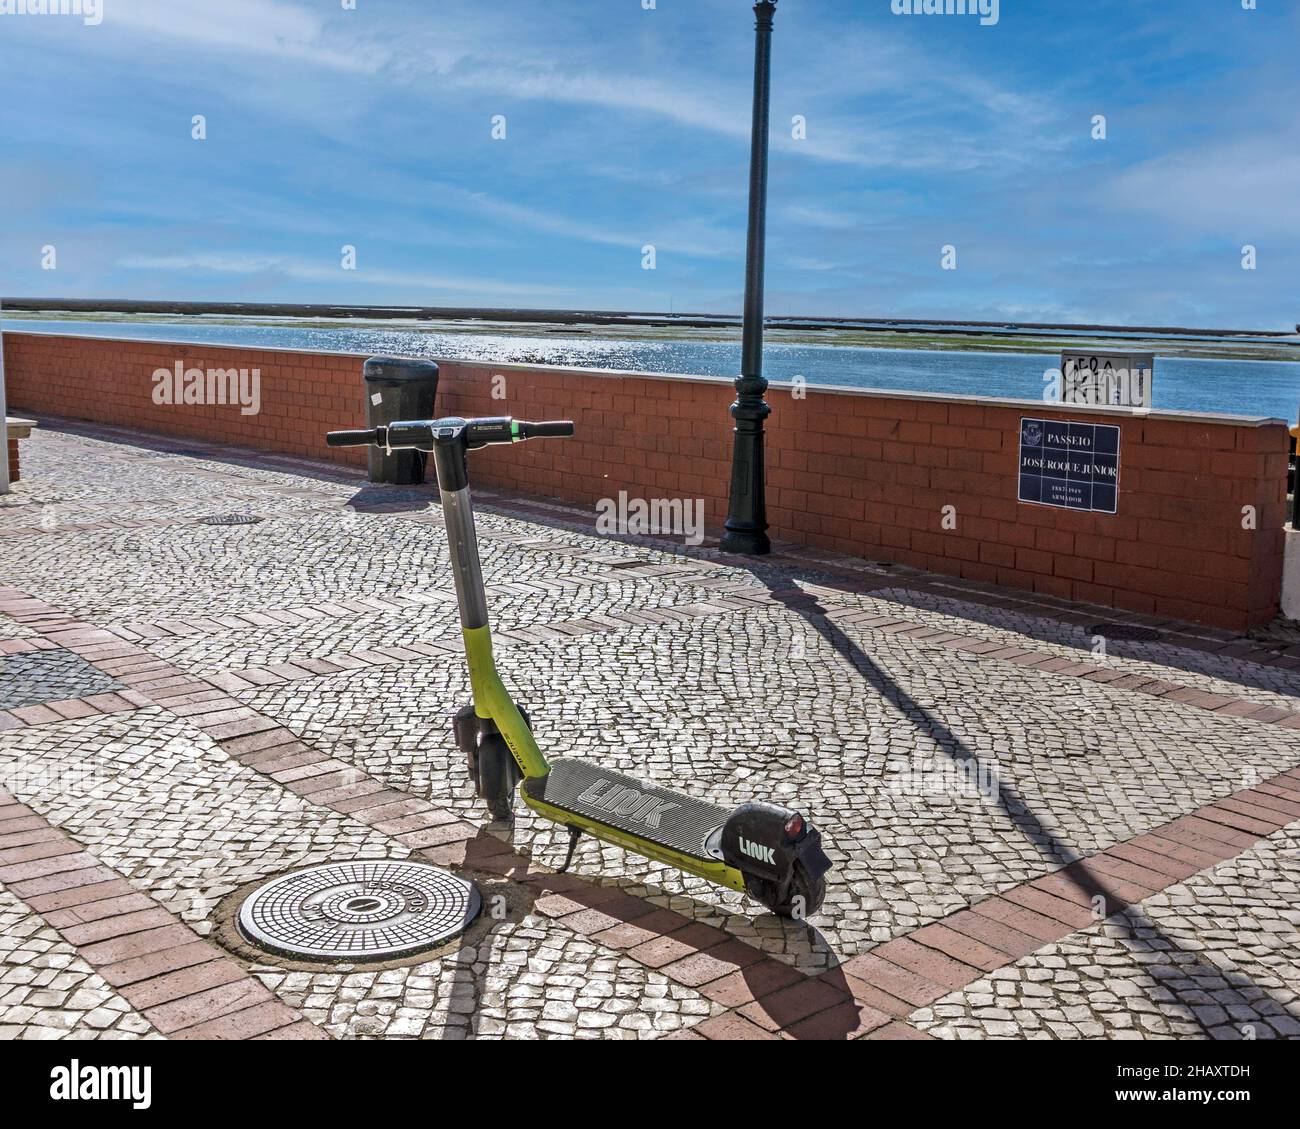 A Link Electric Scooter for hire in the port of Faro, Portugal. Stock Photo